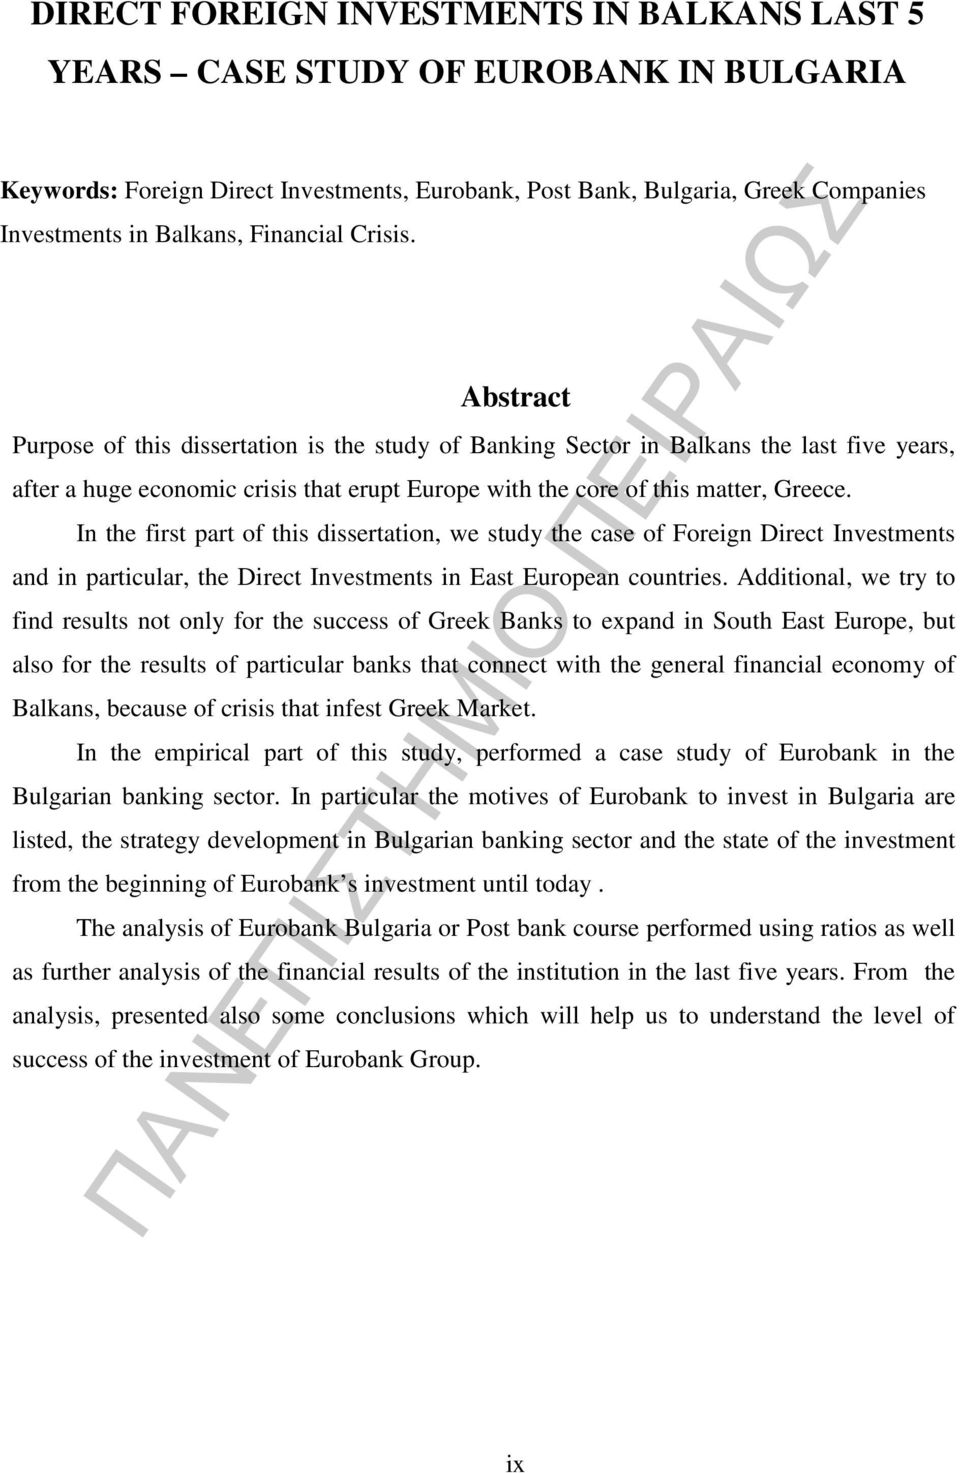 Abstract Purpose of this dissertation is the study of Banking Sector in Balkans the last five years, after a huge economic crisis that erupt Europe with the core of this matter, Greece.